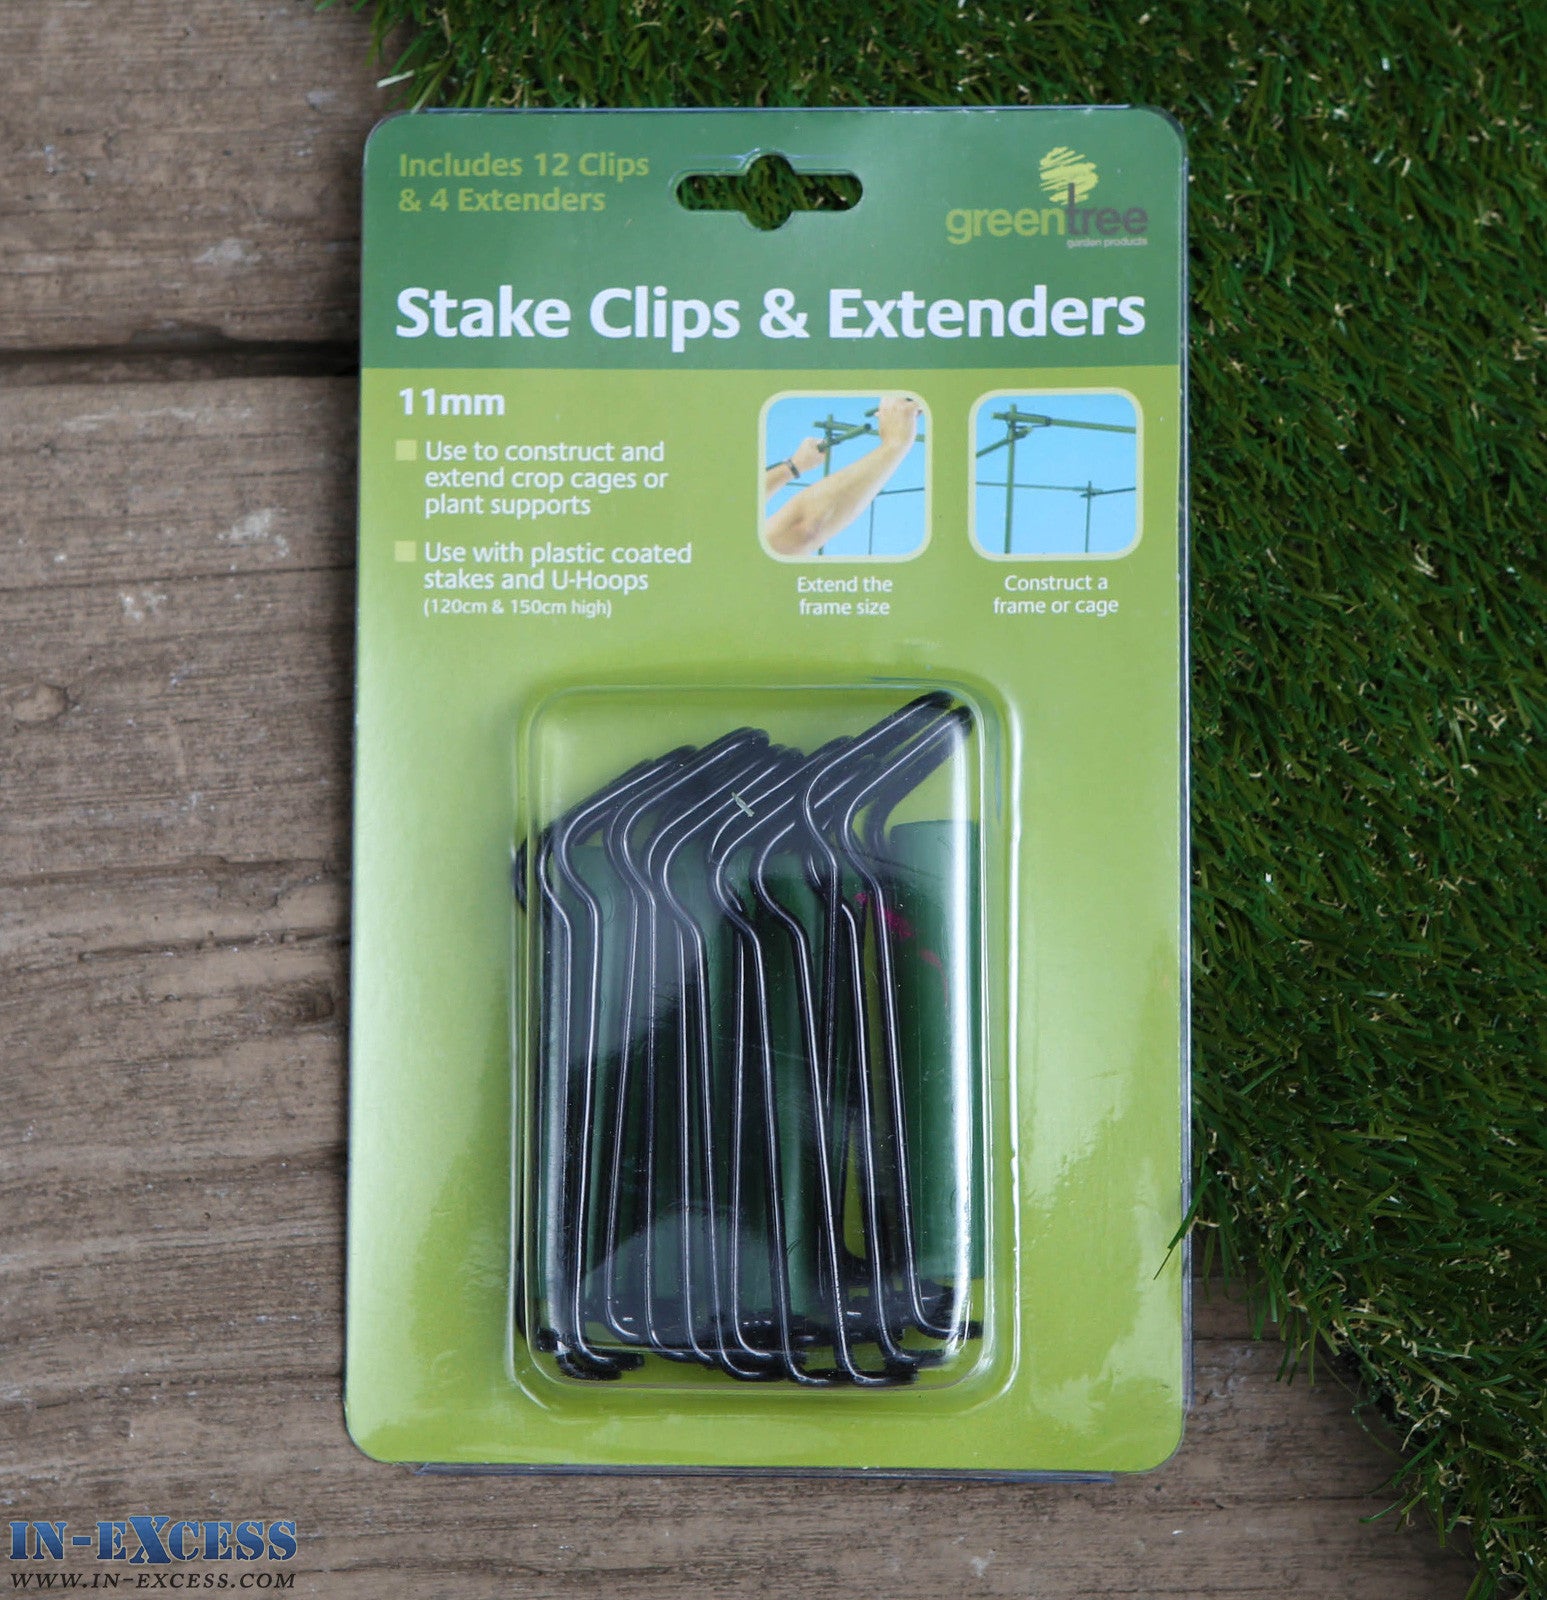 Green Tree Stake Clips & Extenders 11mm (12 clips & 4 extenders)